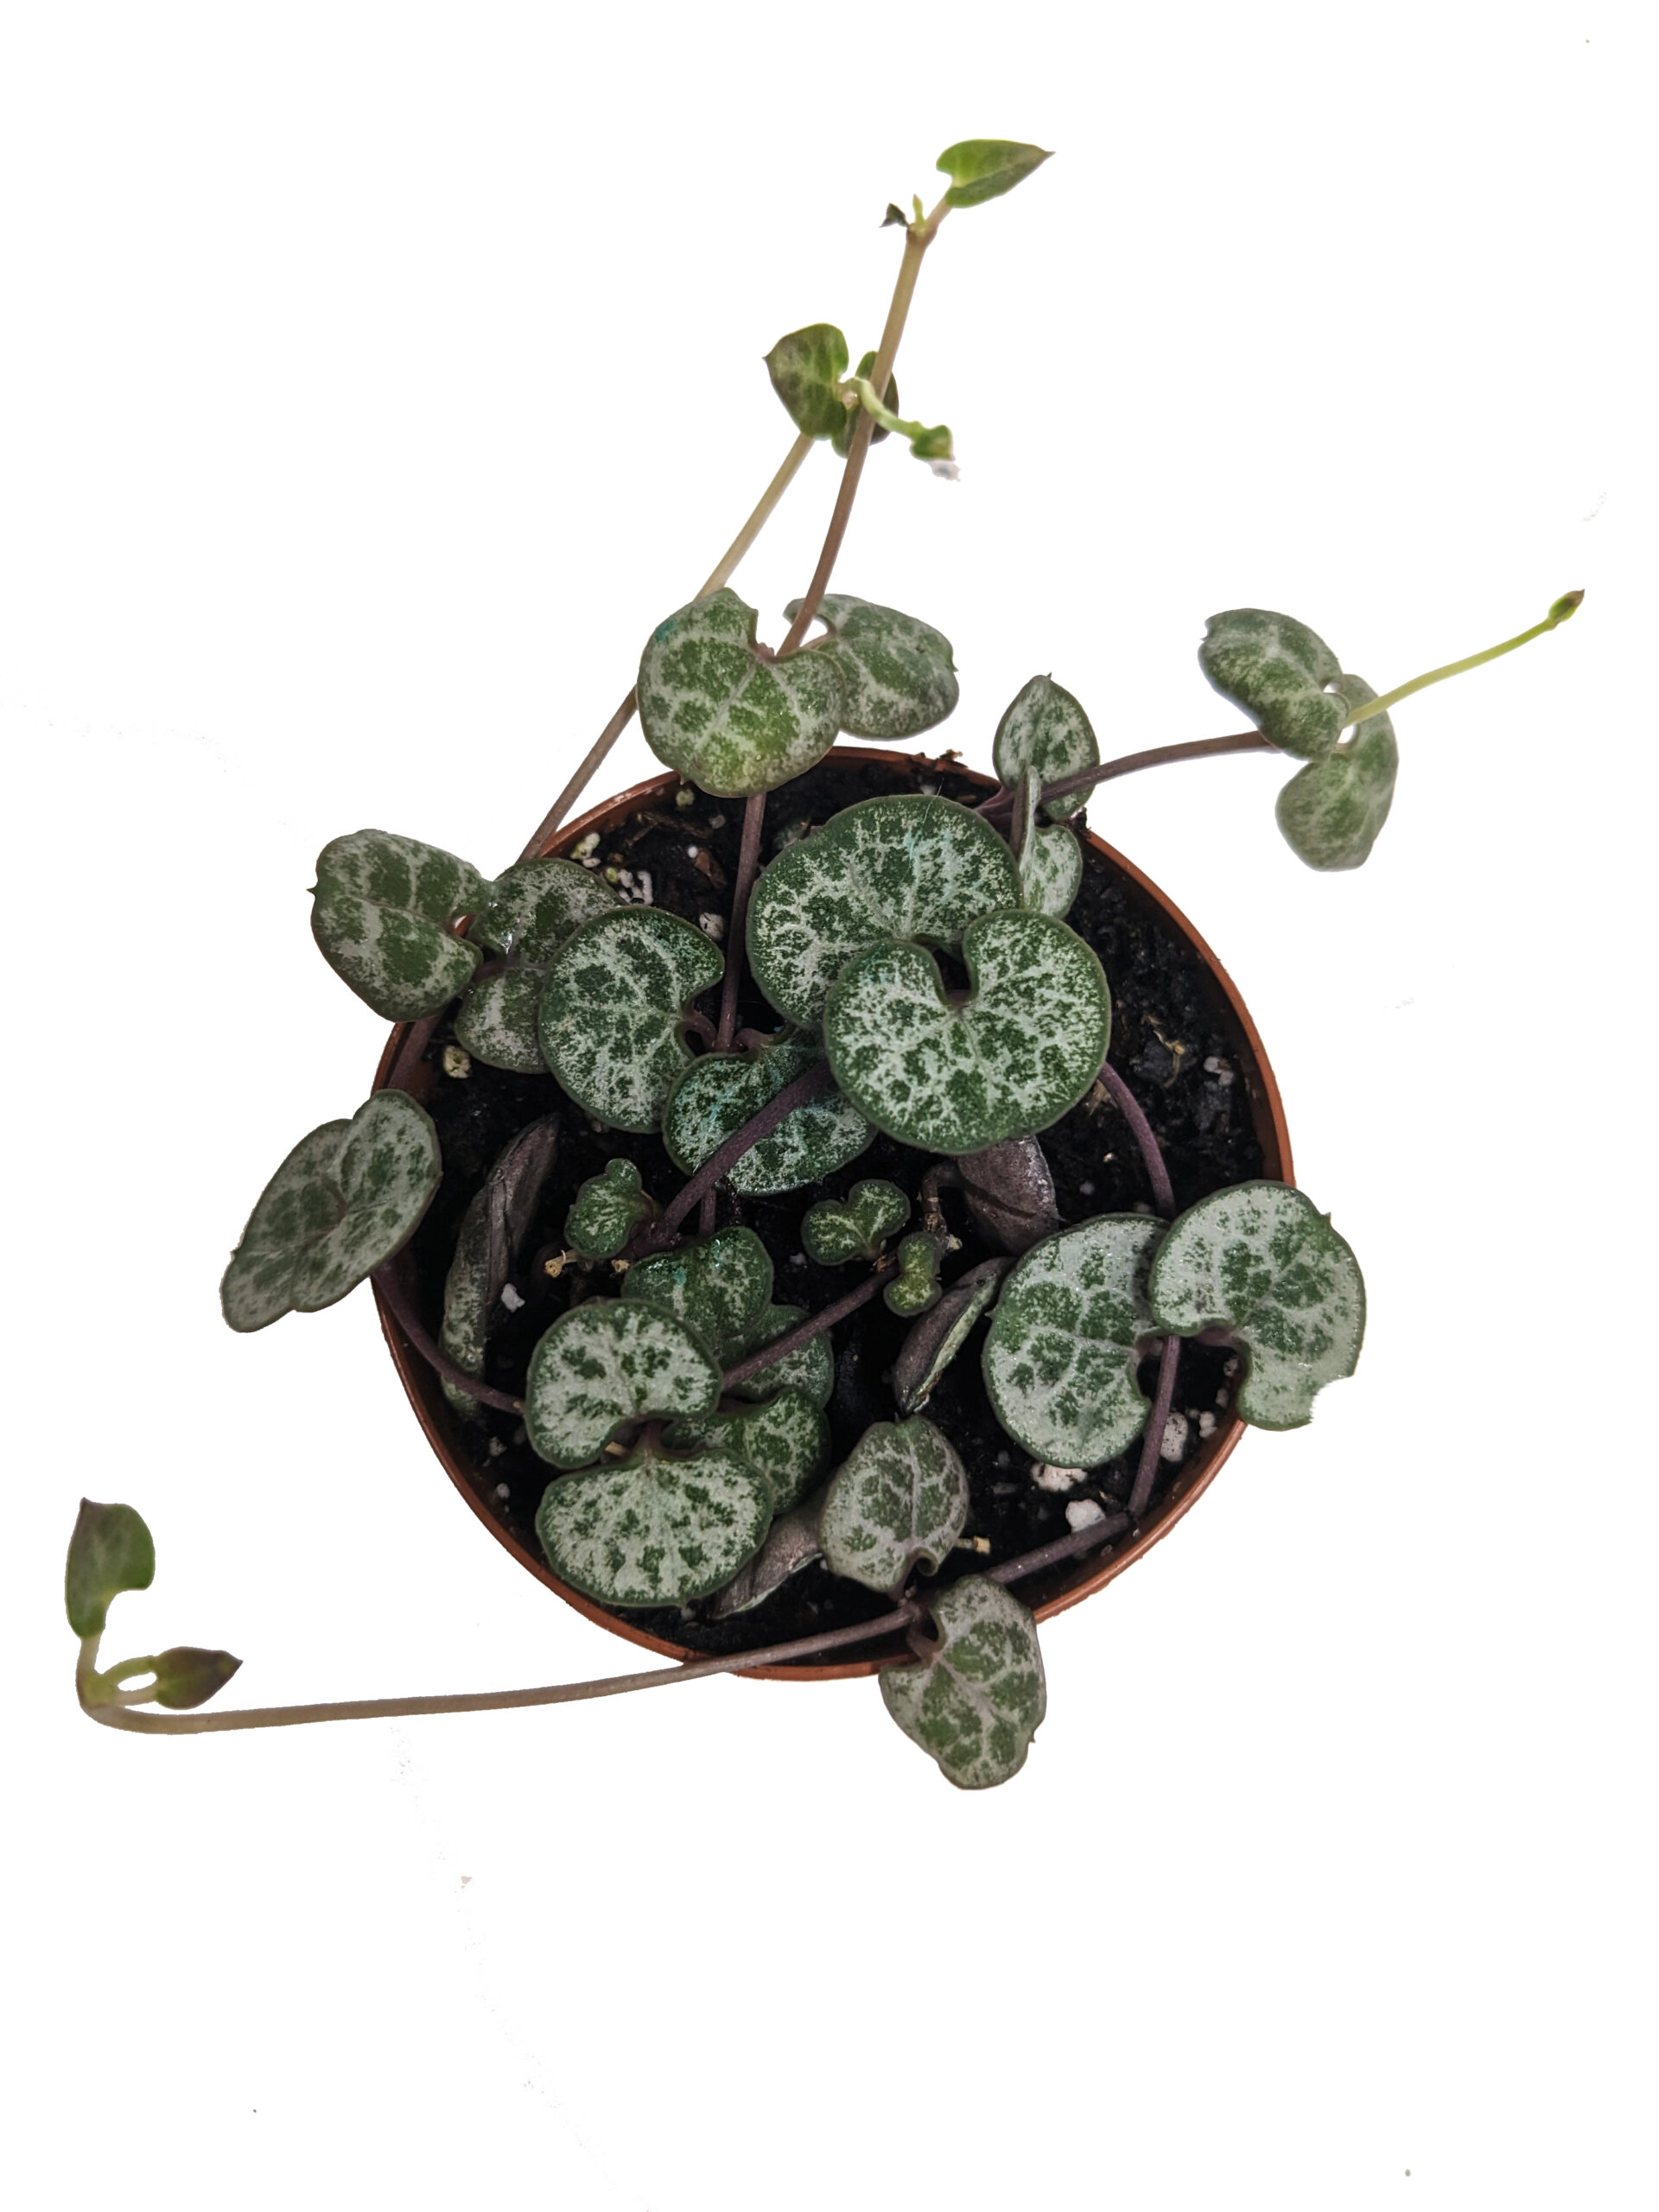 ceropegia woodii "string of hearts silver"